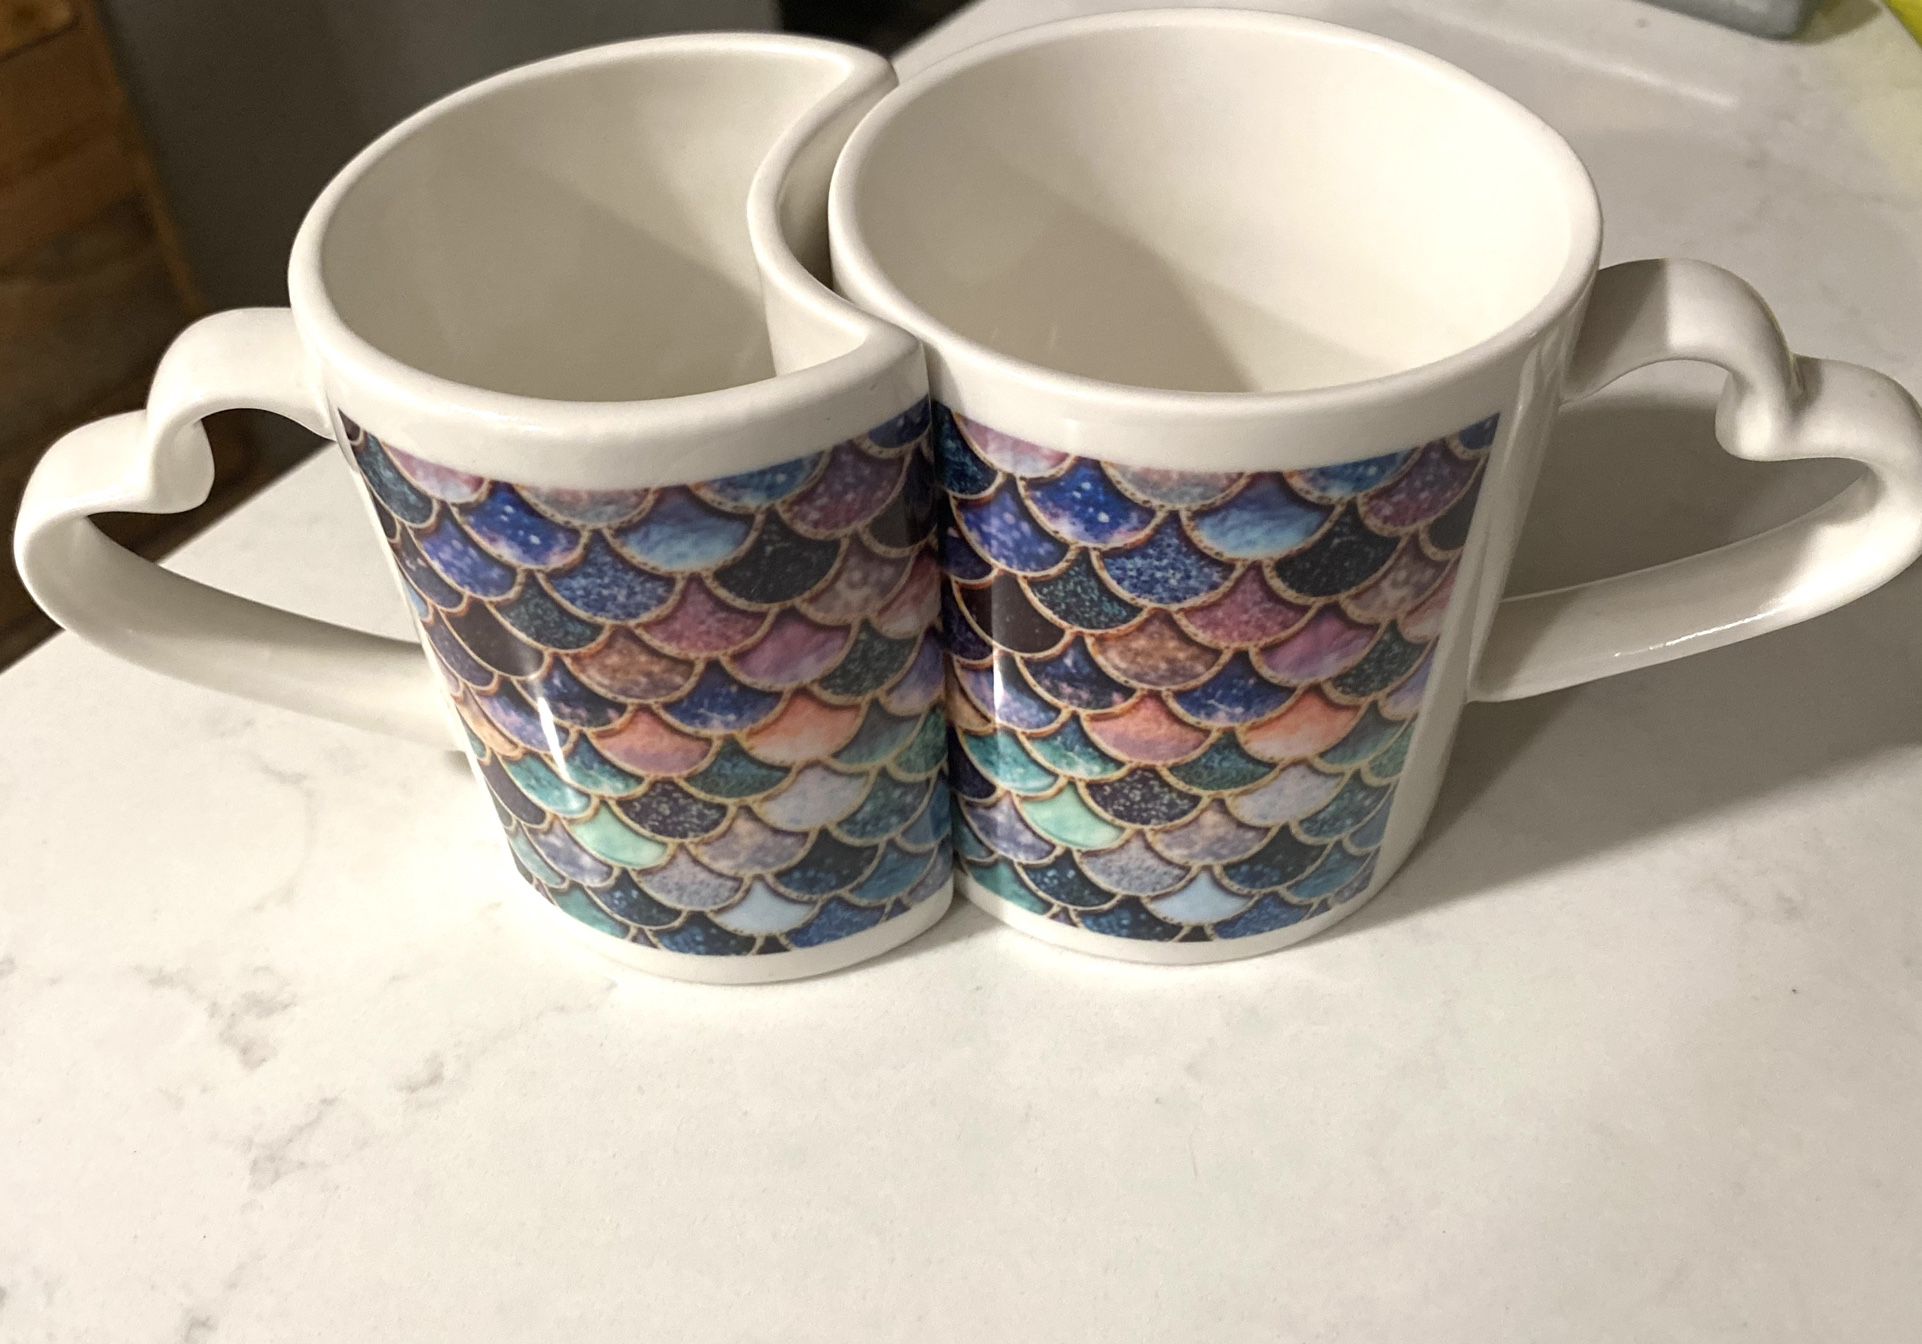 Glitter Mermaid Scales Coffee Mug Set - Made to perfectly fit together - with Heart Handles 